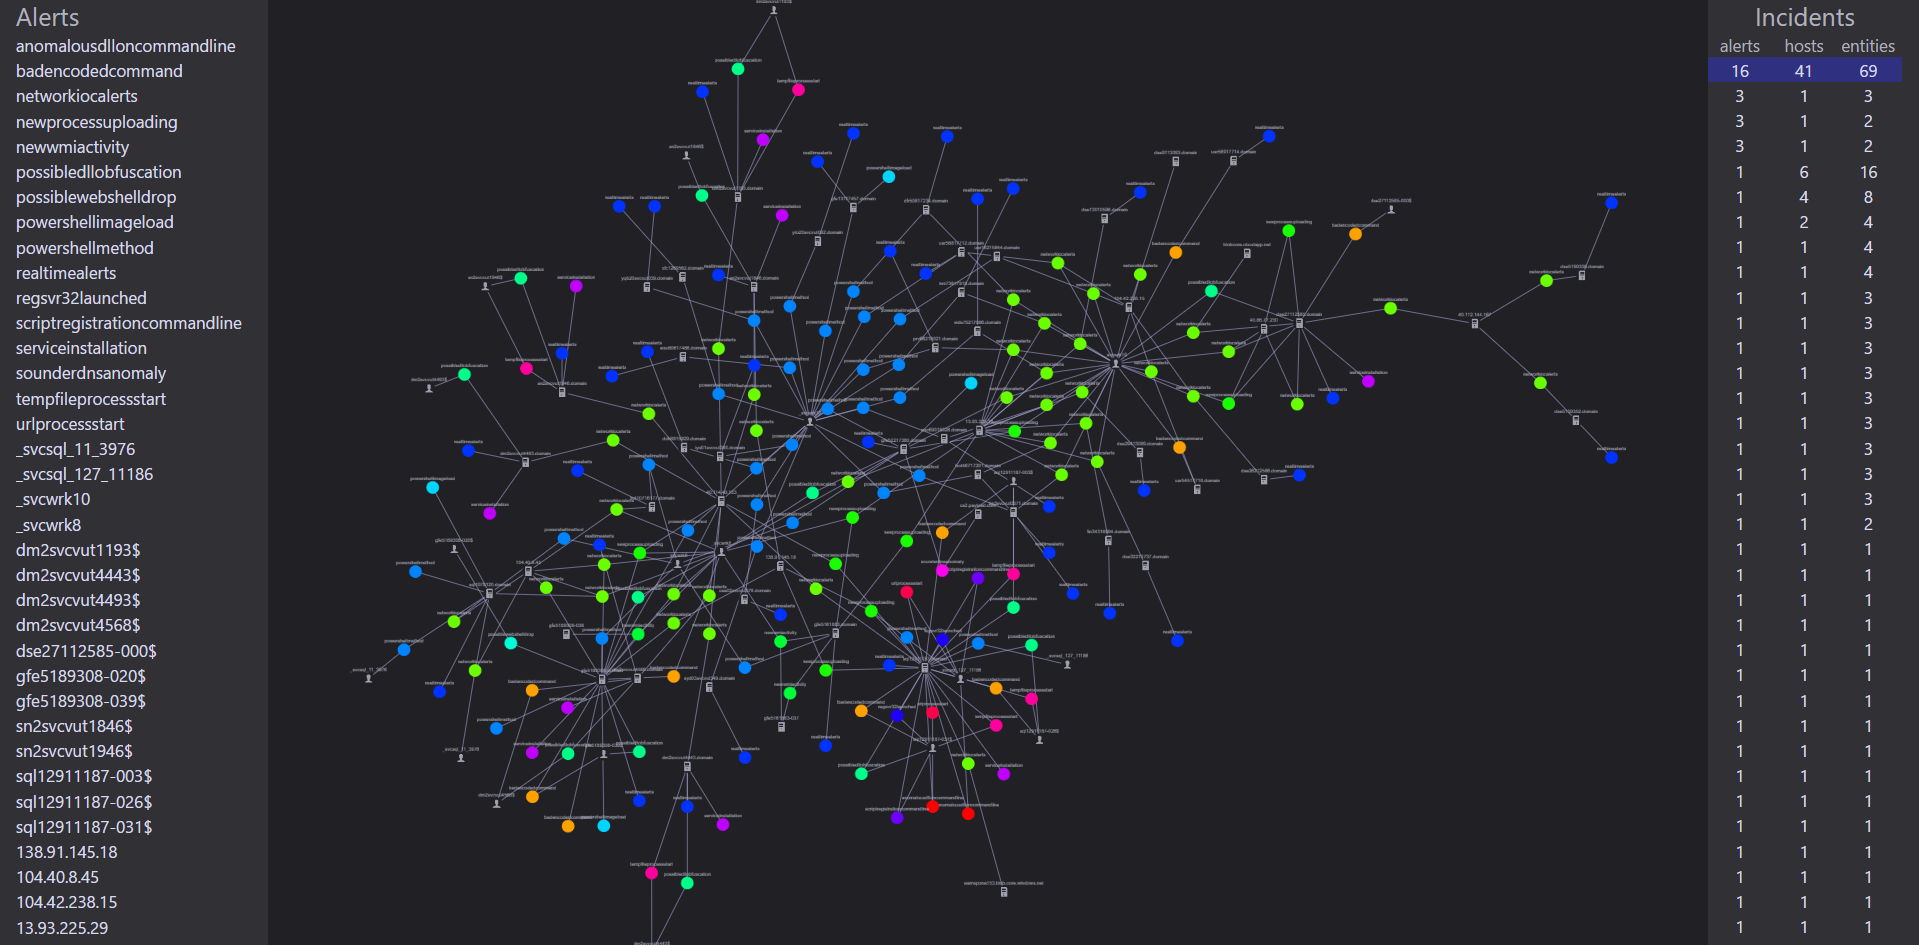 Interactive alert graph showing a cluster of red team activity